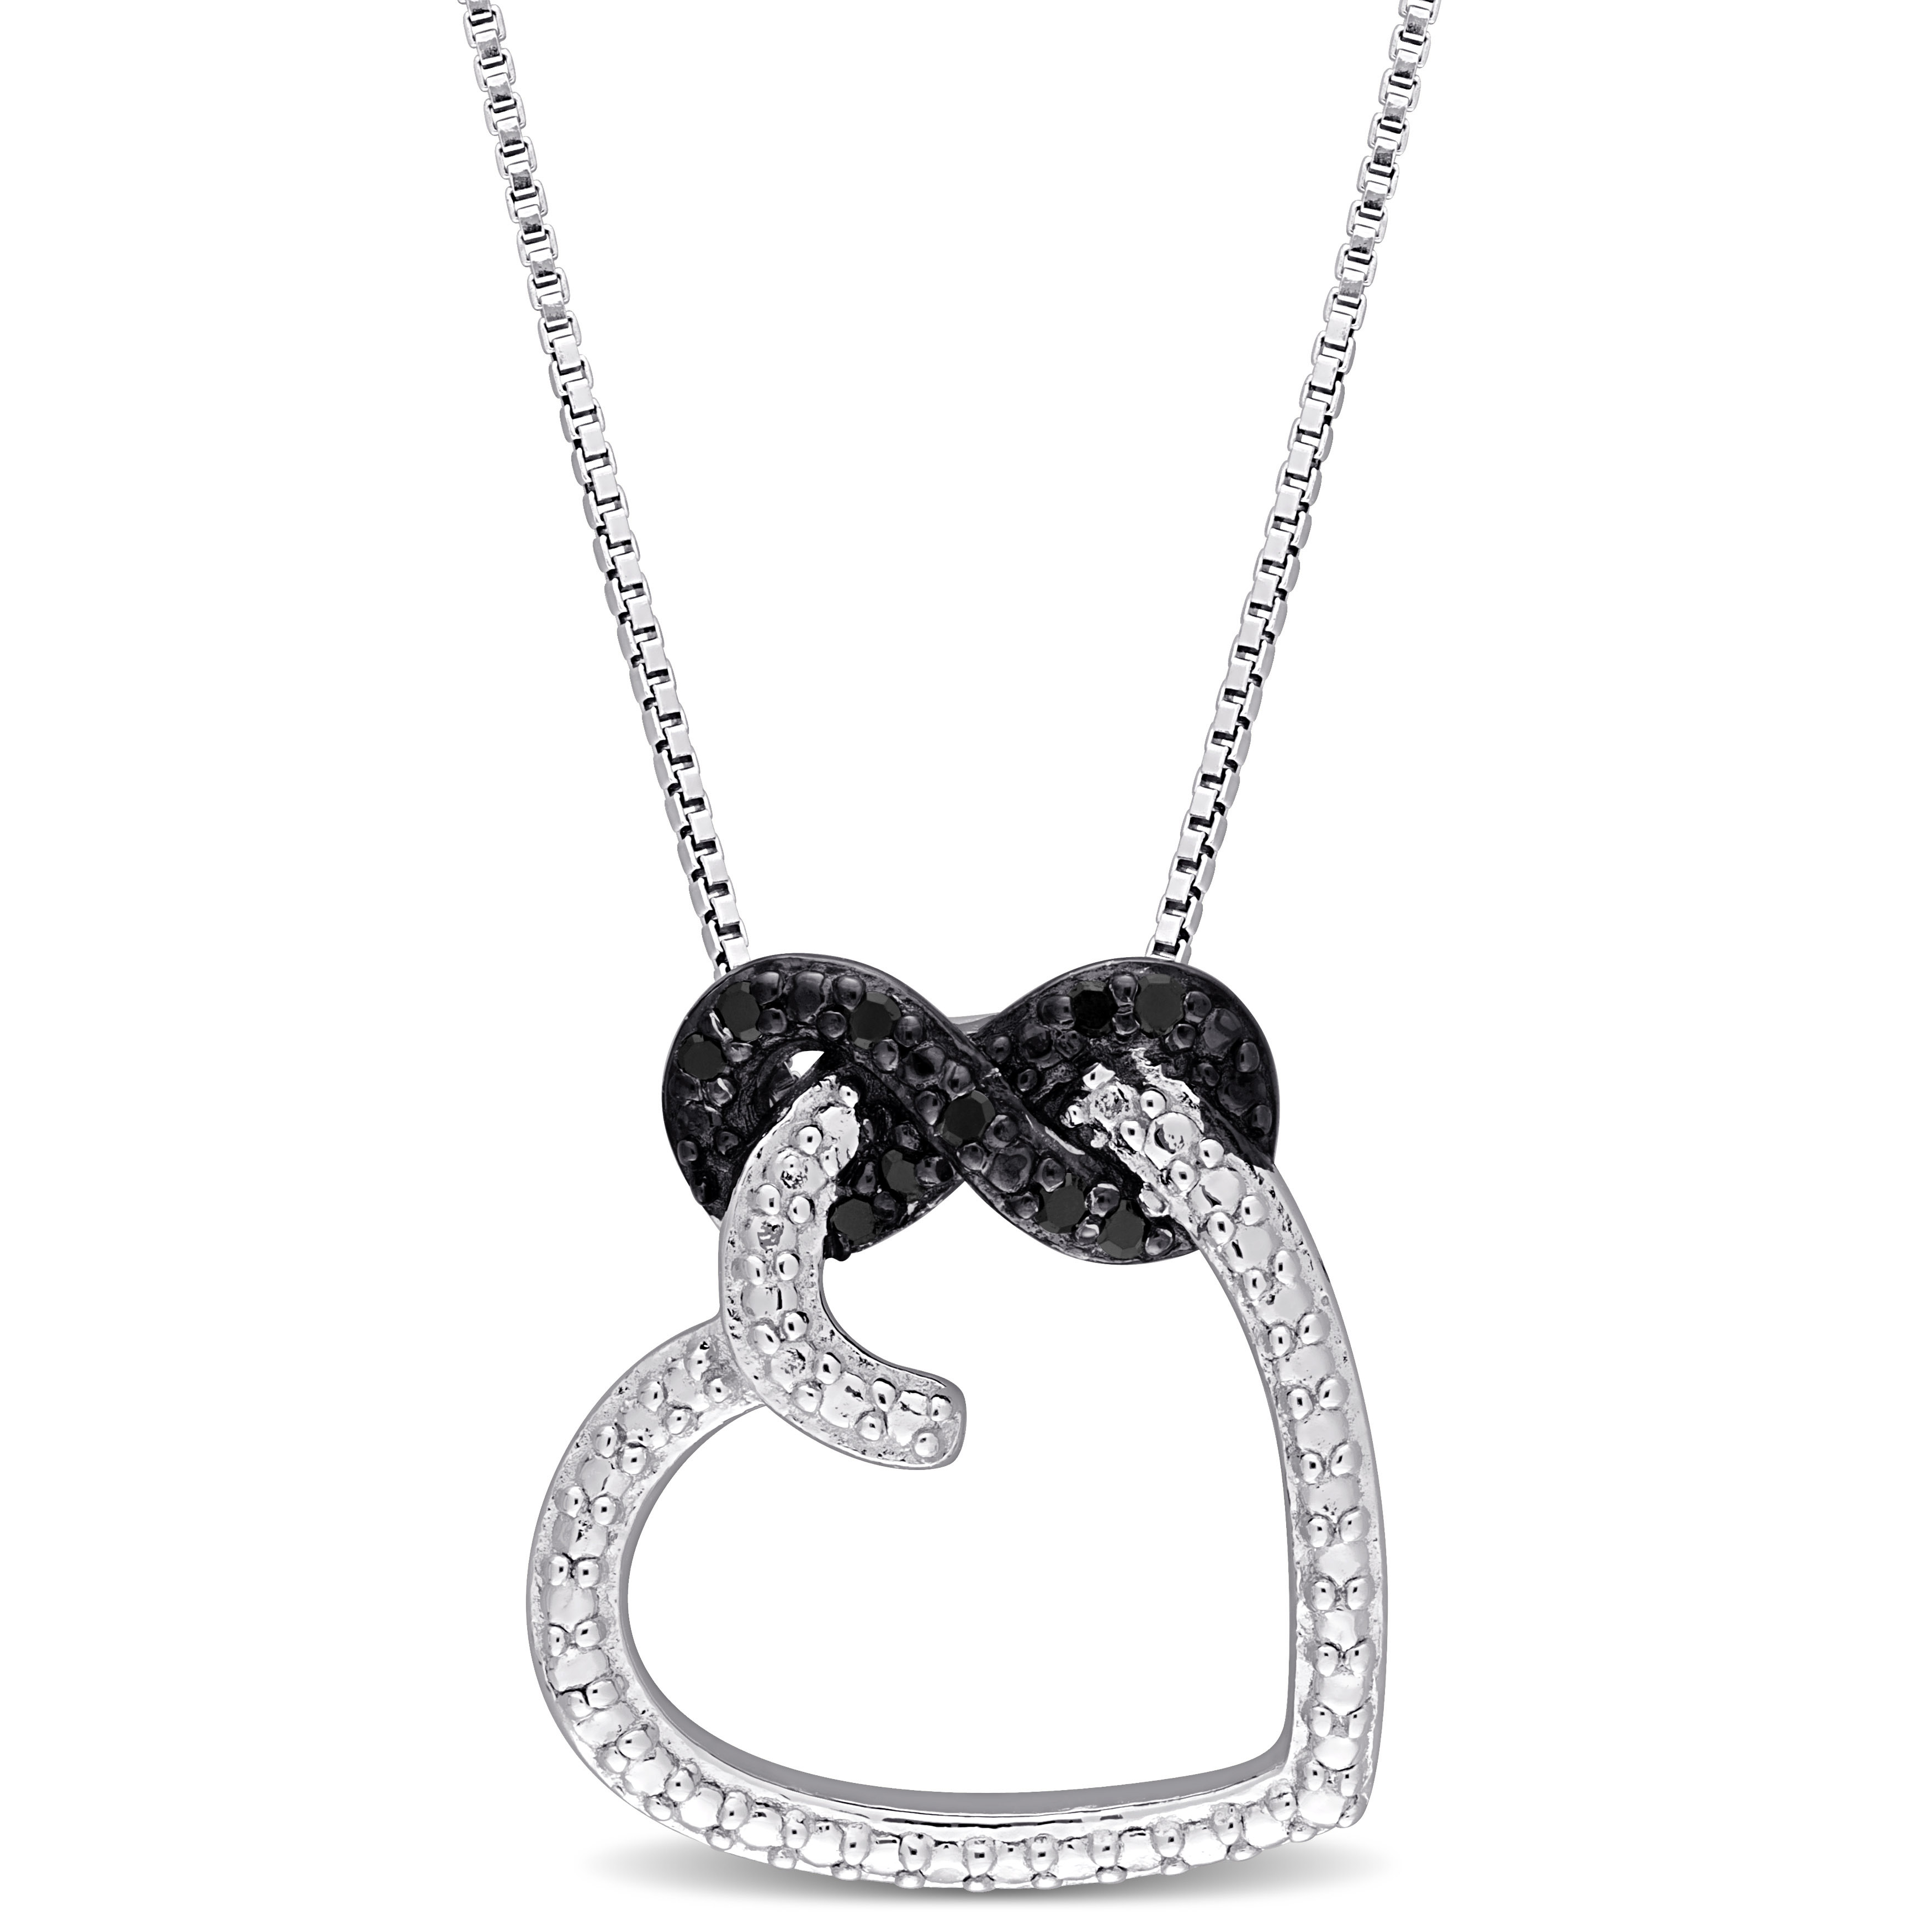 Black Diamond Accent Heart Infinity Pendant with Chain in Sterling Silver with Black Rhodium Plating